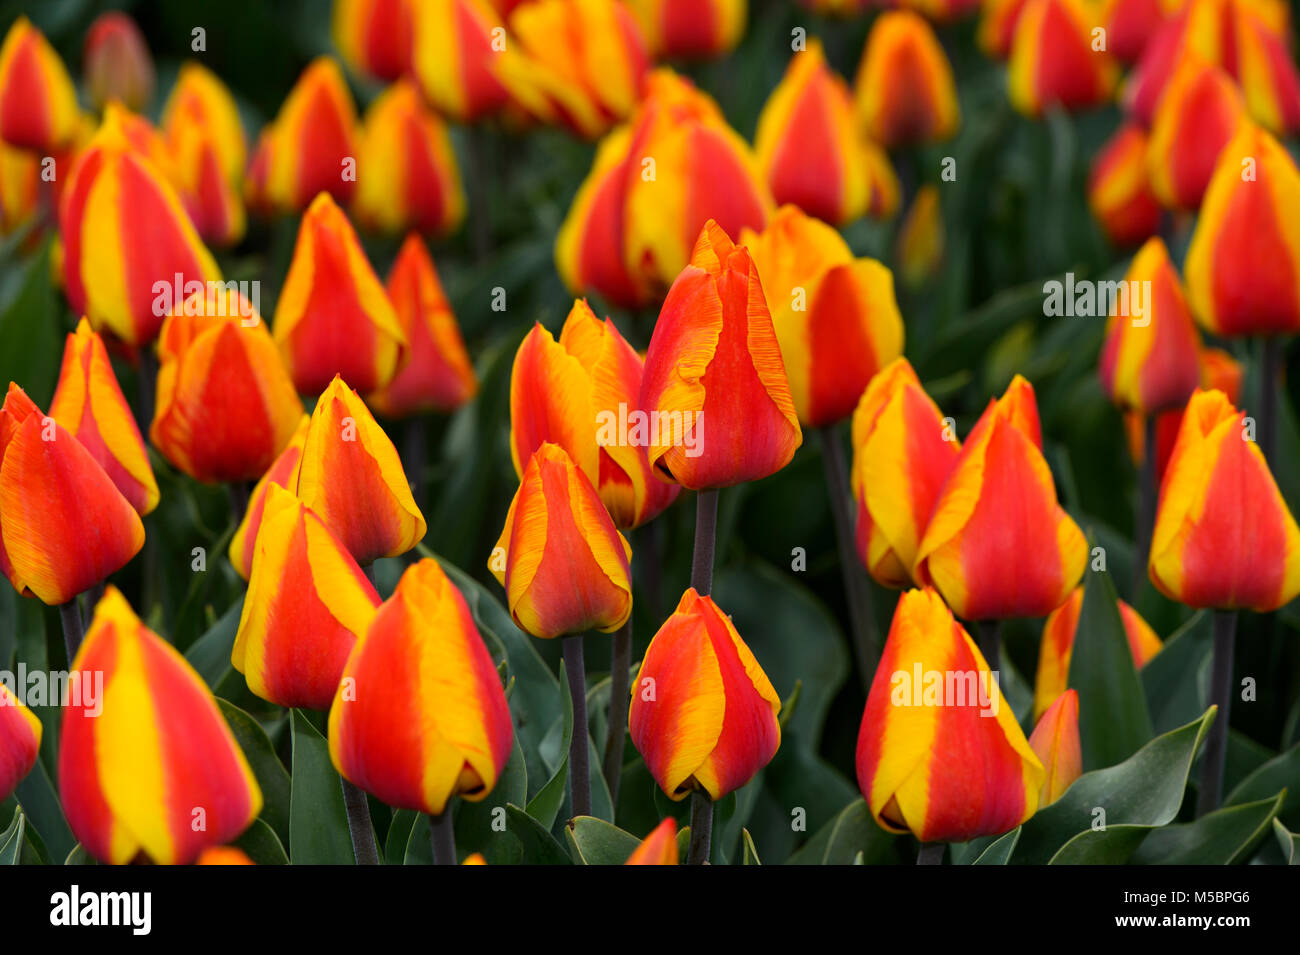 Field of red and yellow flamed Dutch tulips, Bollenstreek, Netherlands Stock Photo